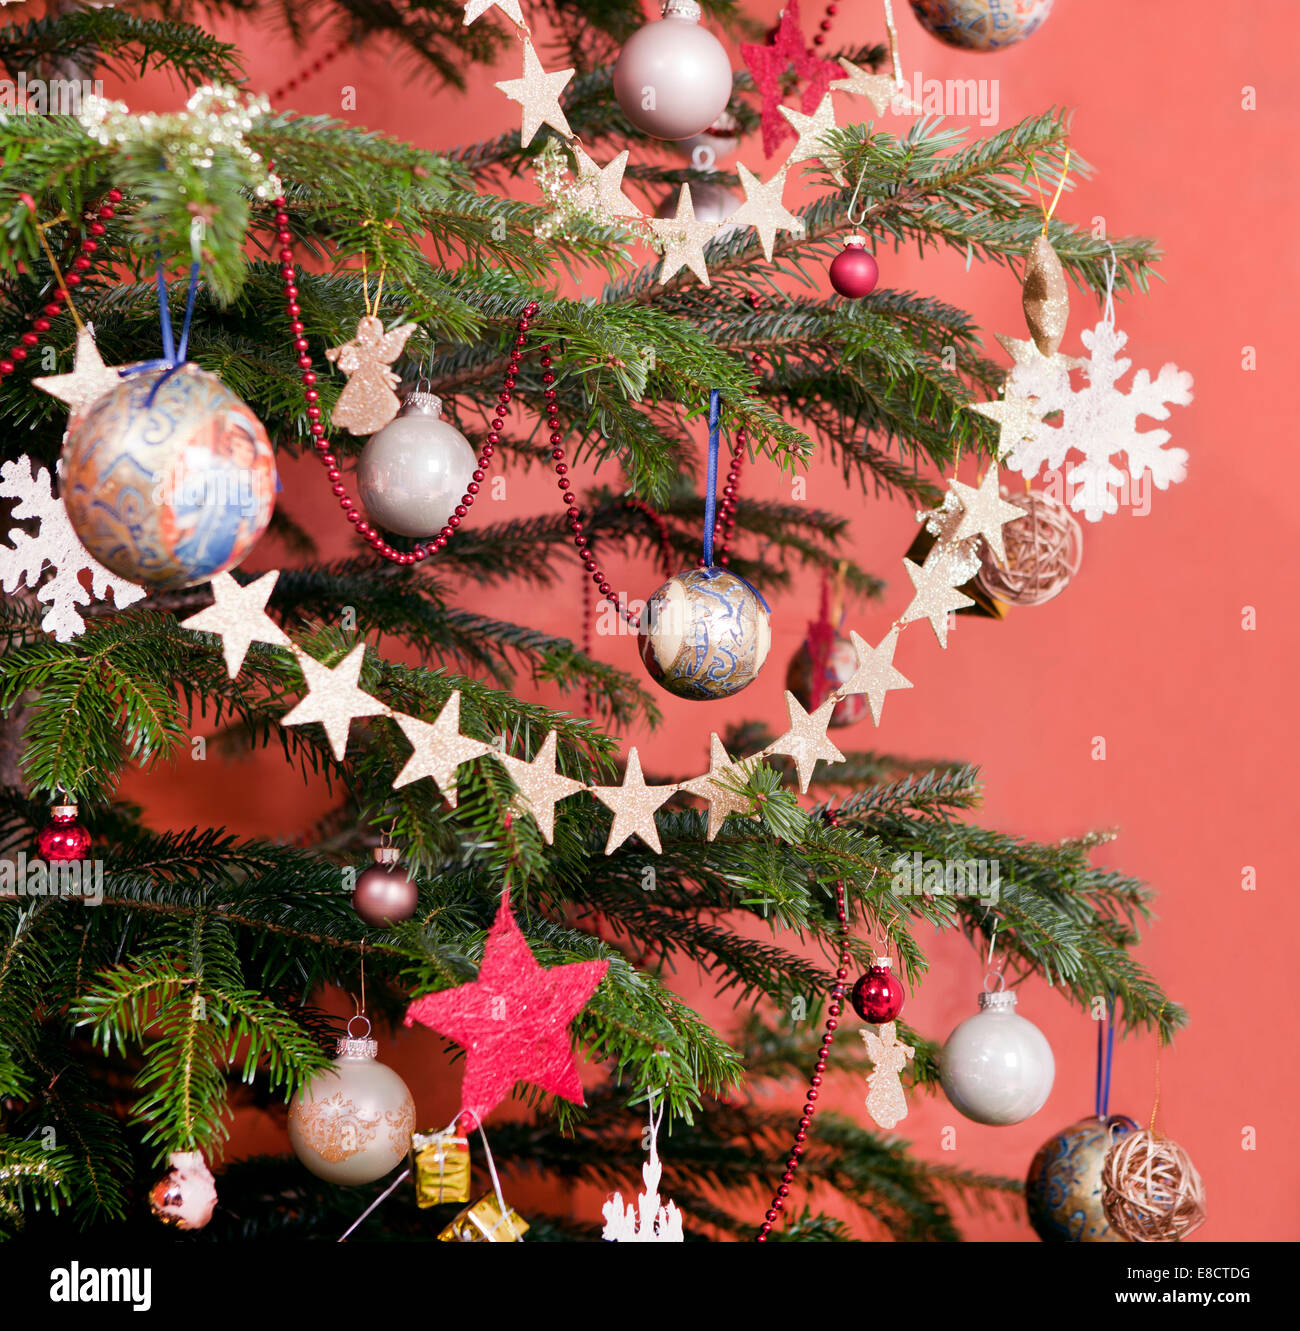 Christmas tree decorated with stars and painted Christmas baubles Stock Photo